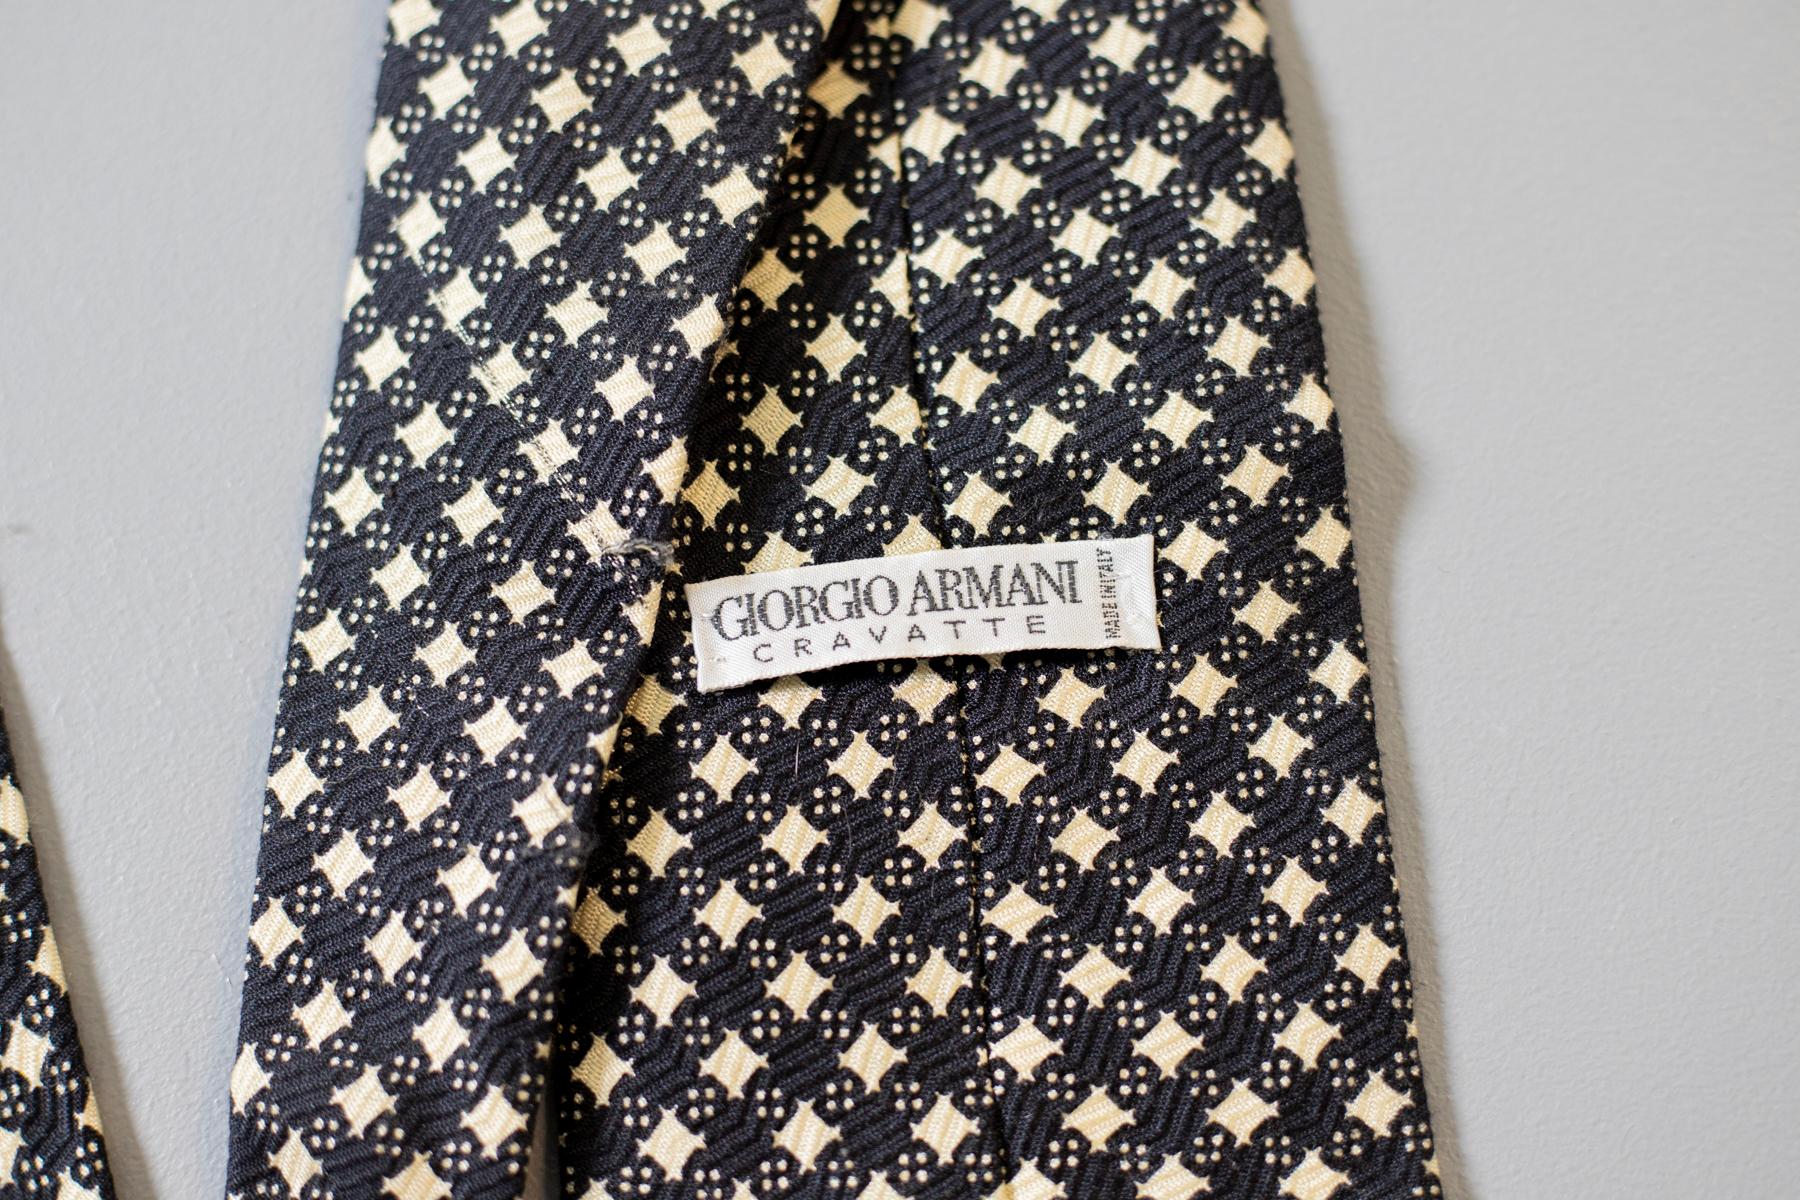 Classic, yet unique, this Giorgio Armani all-silk vintage tie is the right choice for a formal evening. Checked in black and white and labelled Giorgio Armani, this vintage accessory goes perfectly with a white shirt and a total black suit. 